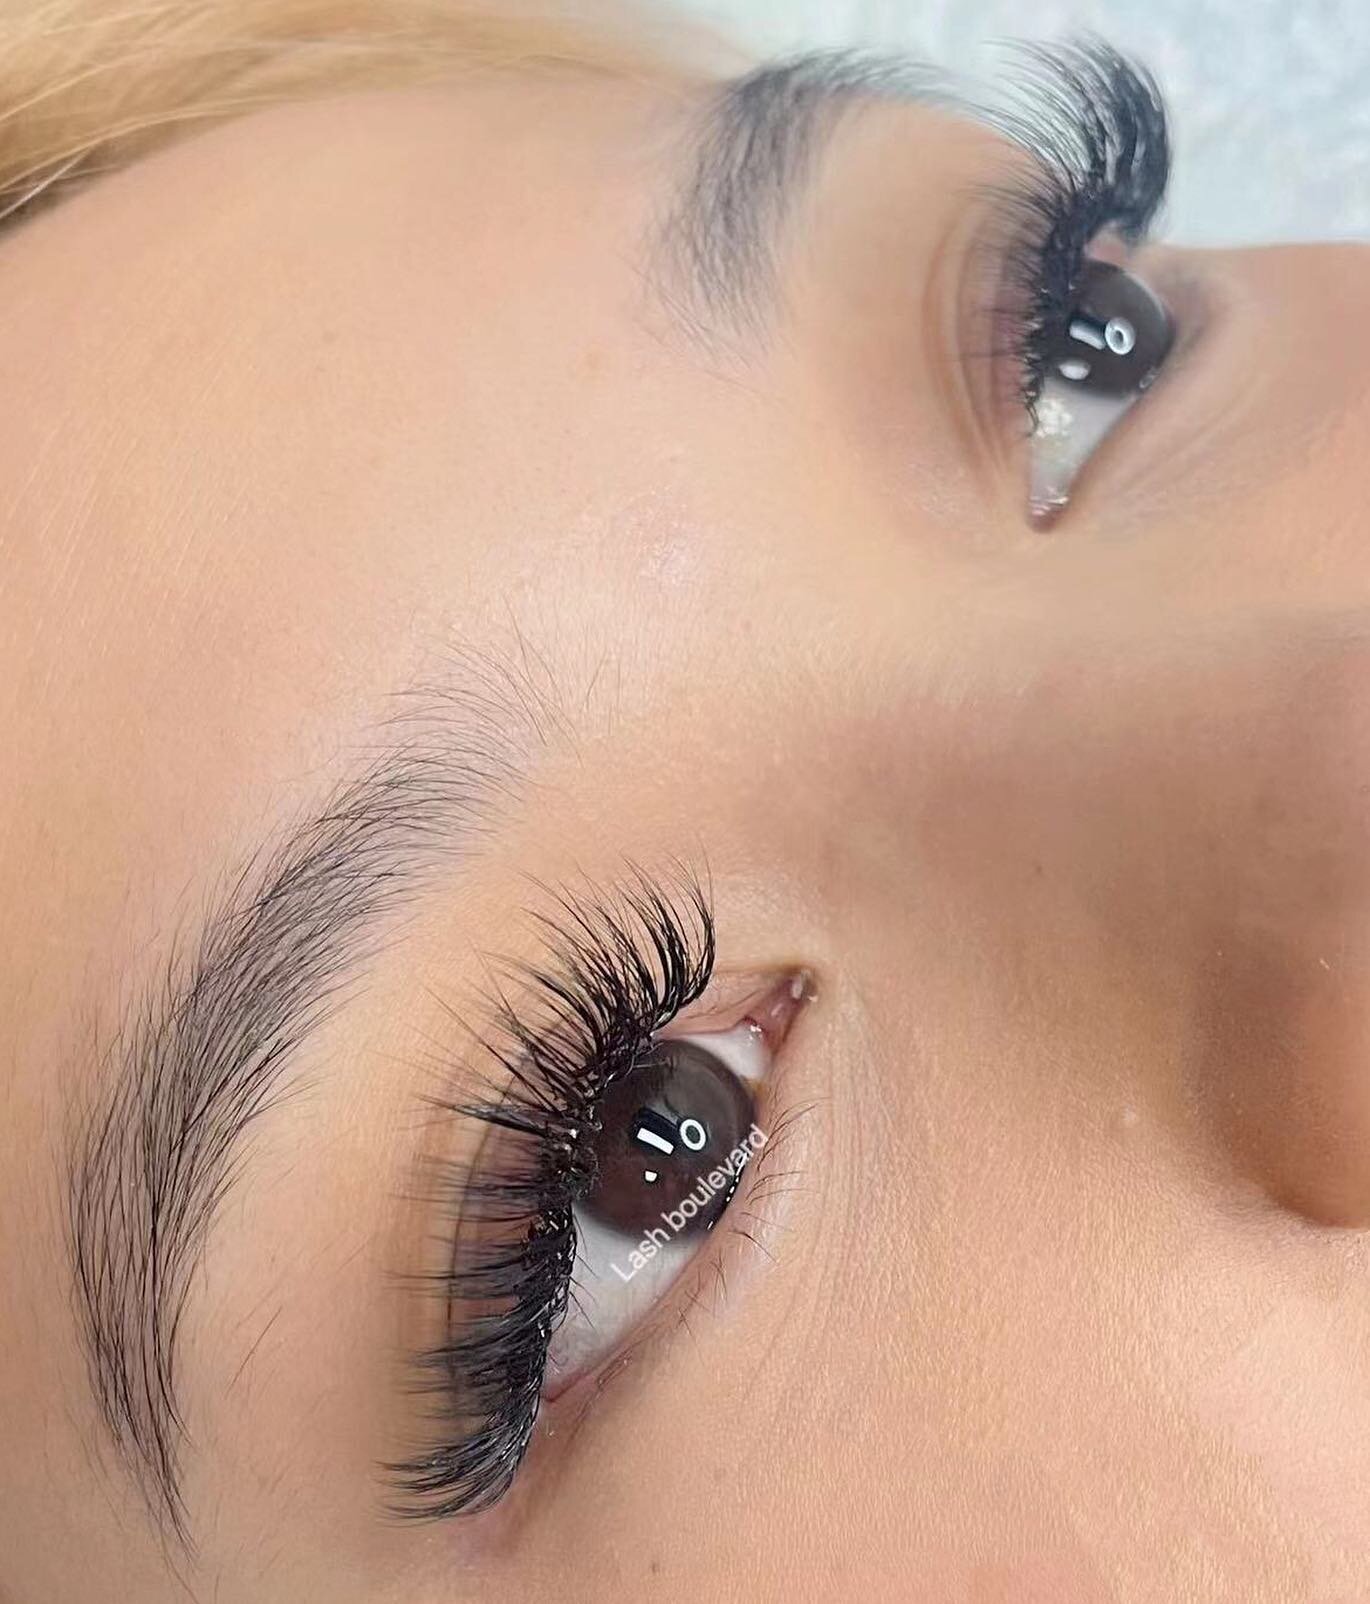 🔥lash boulevard🔥
Repost @lashboulevard26
🔛please text or call me if you want to make an appointment out of regular time. call ：416-985-5366

#eyelash #lash #lashes #cateye #microblading
#downtownlashes#Aura#lashboulevard
#volumelash #lashextension